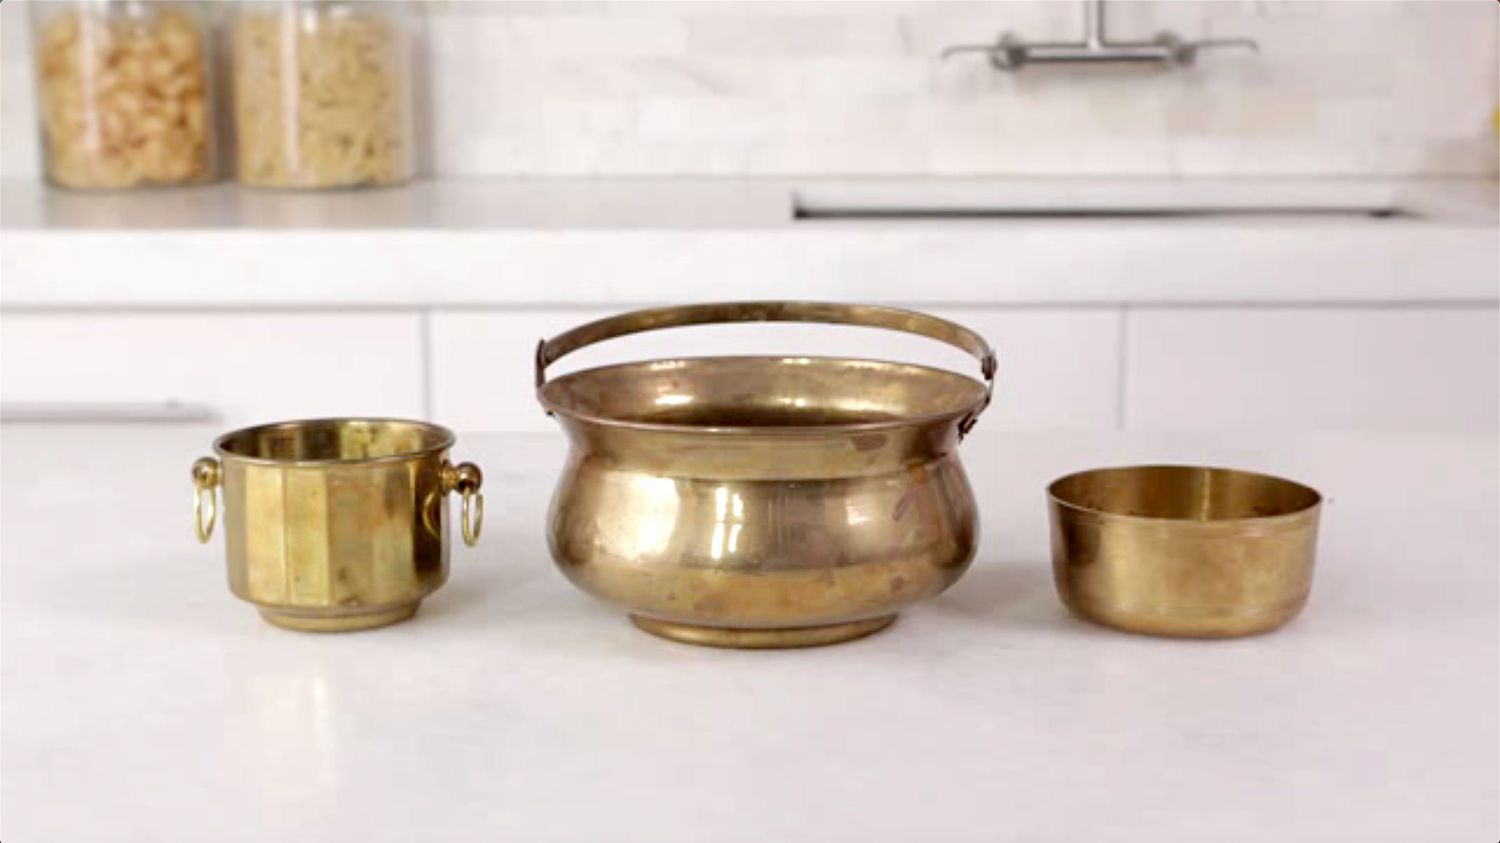 How to Clean Brass and Restore Shine Using Common Household